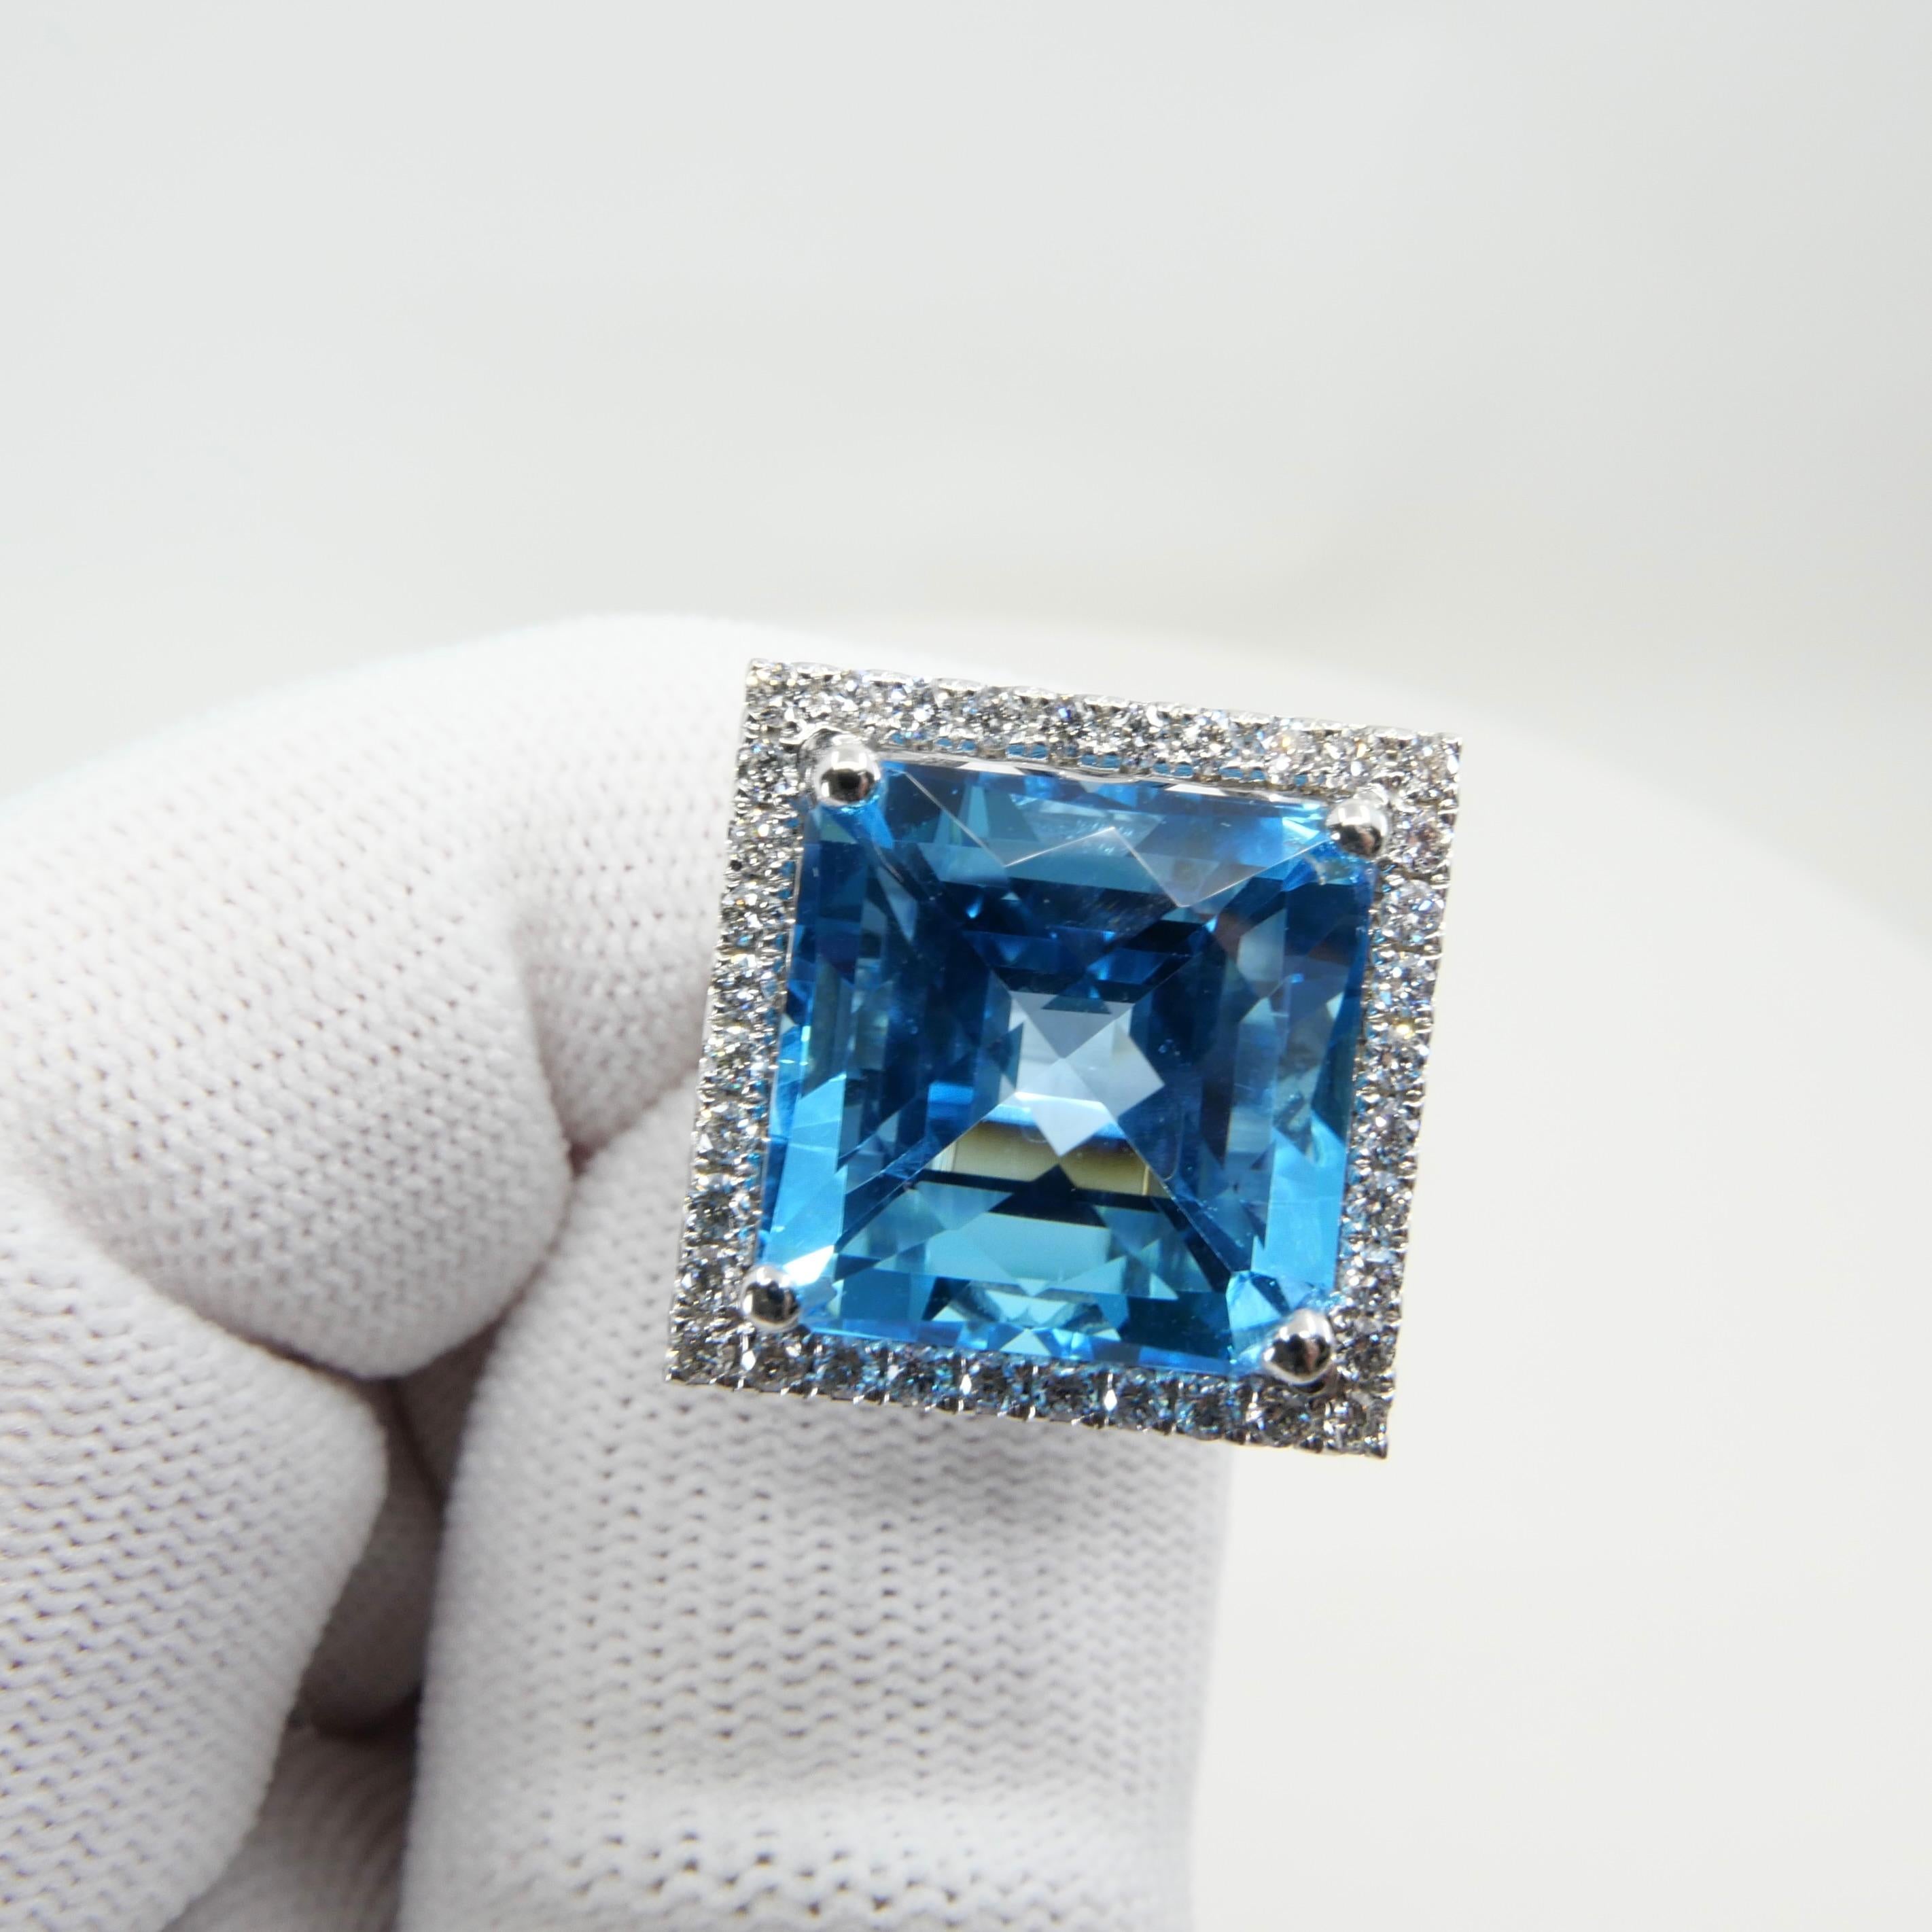  13 Cts checker Square Cut Blue Topaz & Diamond Cocktail Ring. Big Statement. For Sale 12